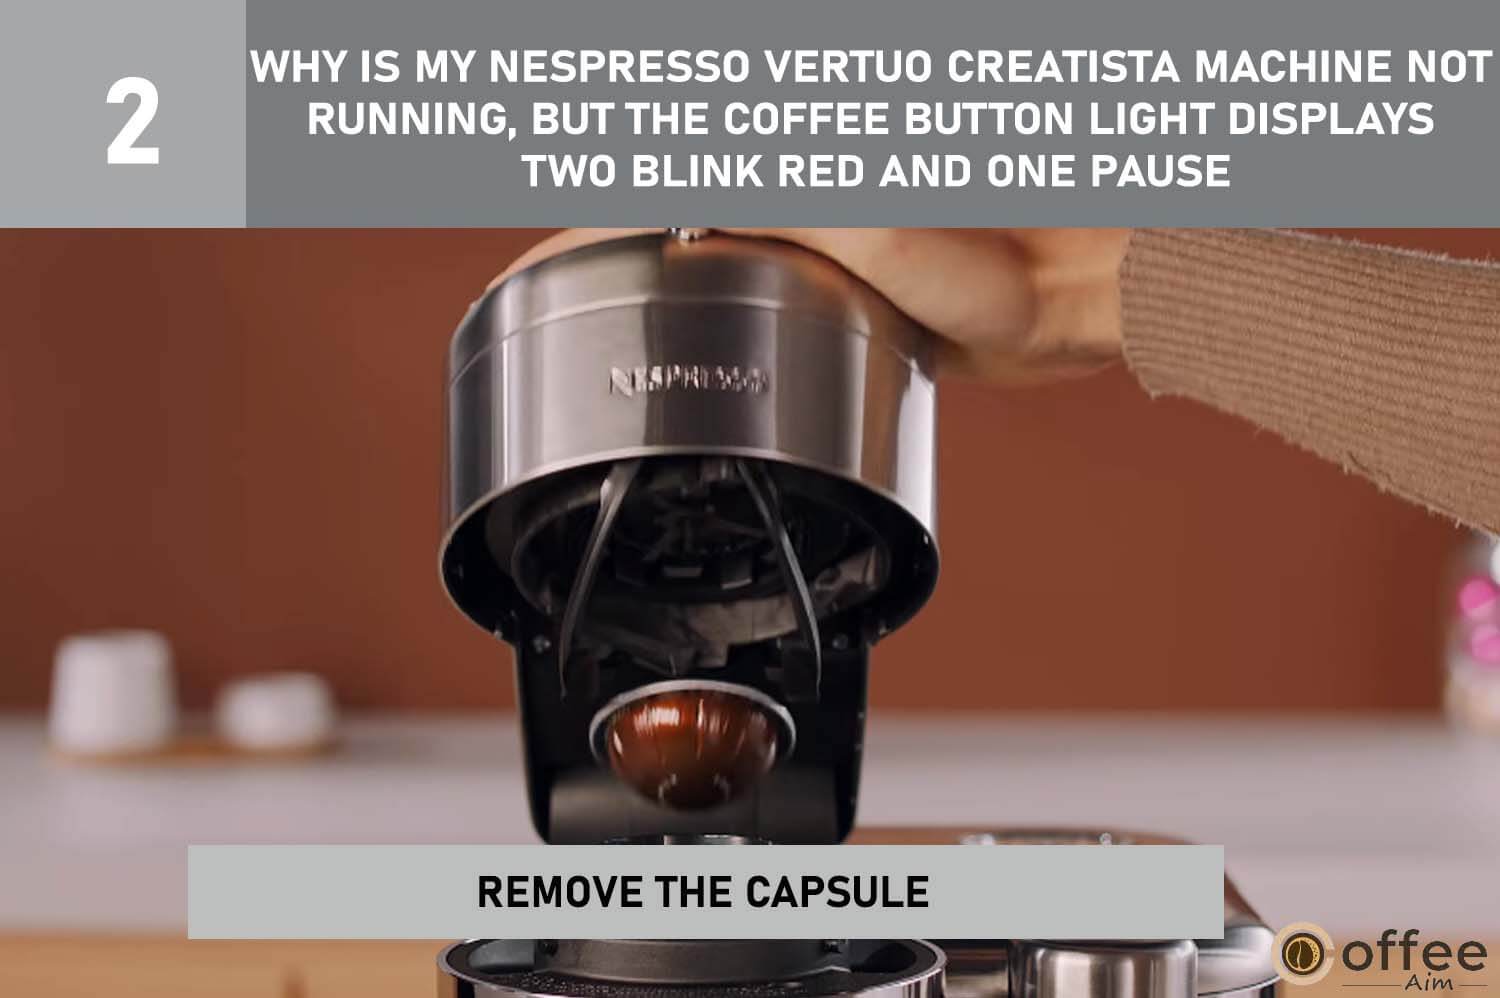 To fix Nespresso Vertuo Creatista issue (blinking red lights), remove the capsule. Follow our guide for detailed troubleshooting steps.